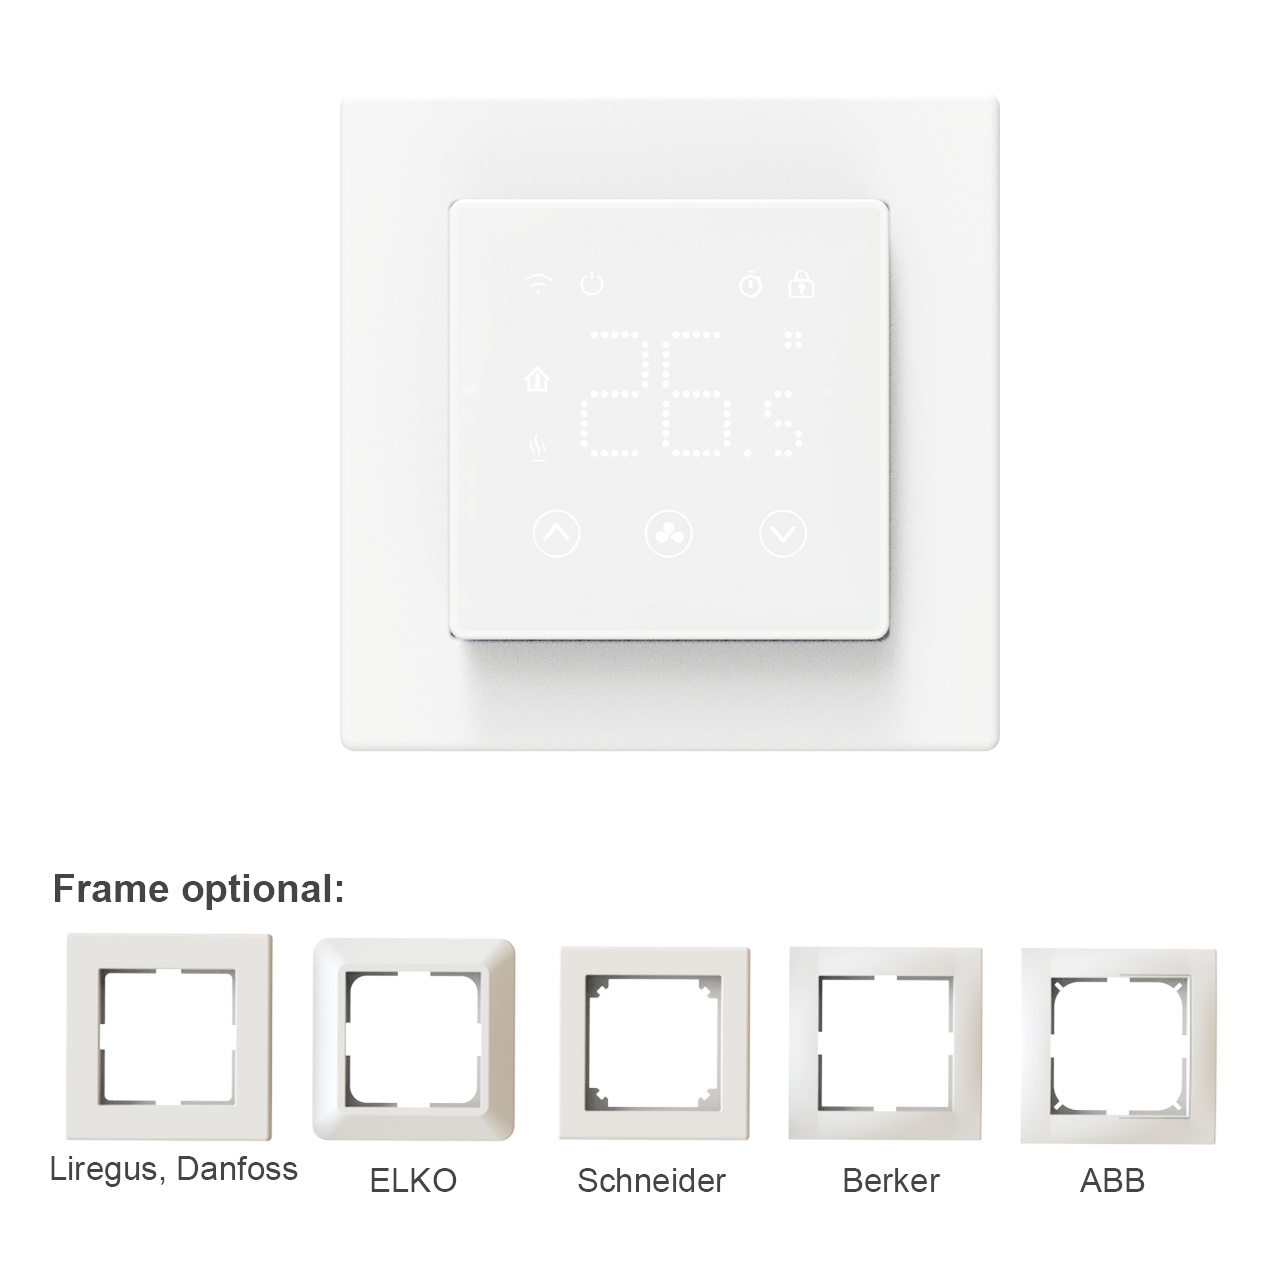 Wifi Touch Thermostat for Electric Floor Heating